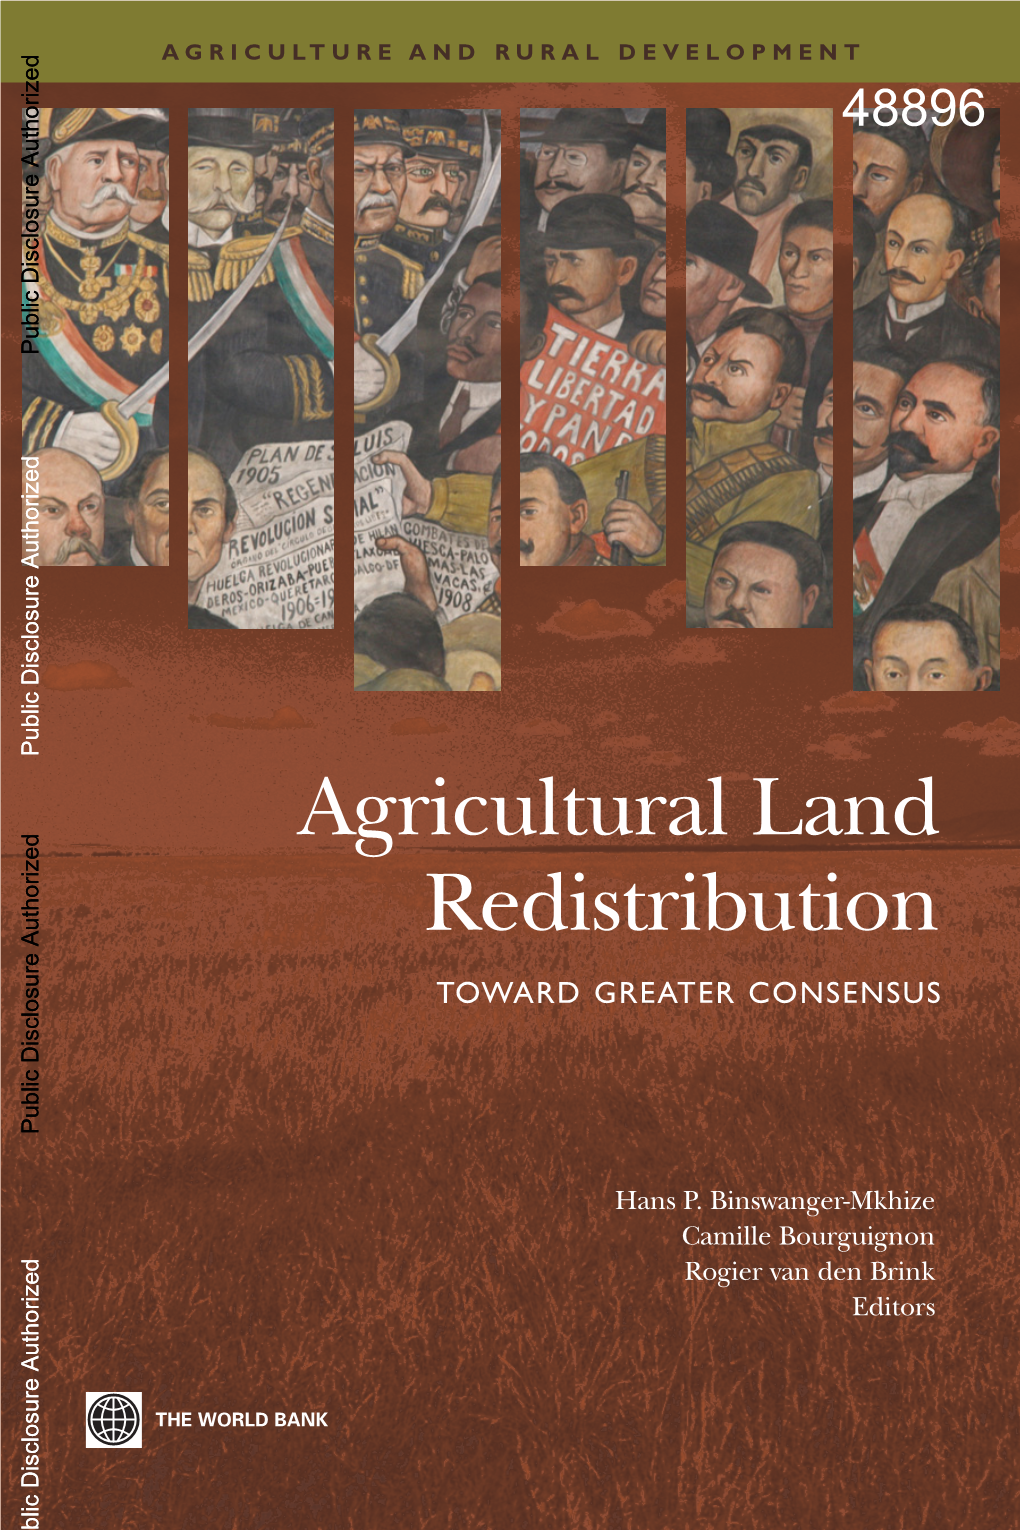 How to Redistribute Agricultural Land: Emerging Principles 14 Conclusion 35 Annex 37 Notes 40 References 40 Part 1I